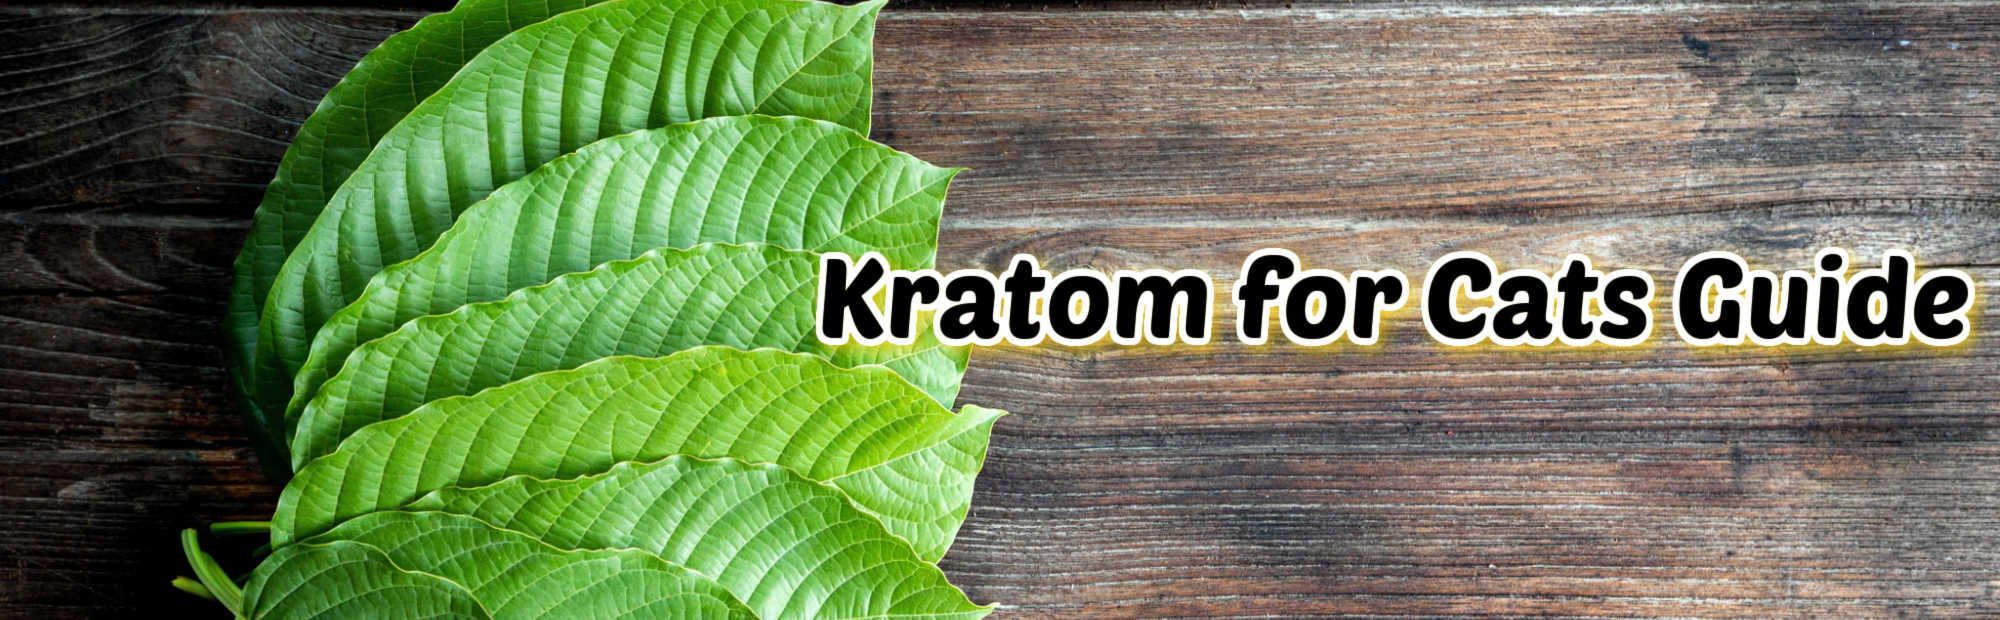 Kratom for Cats: Is it Safe to Give Your Cat?